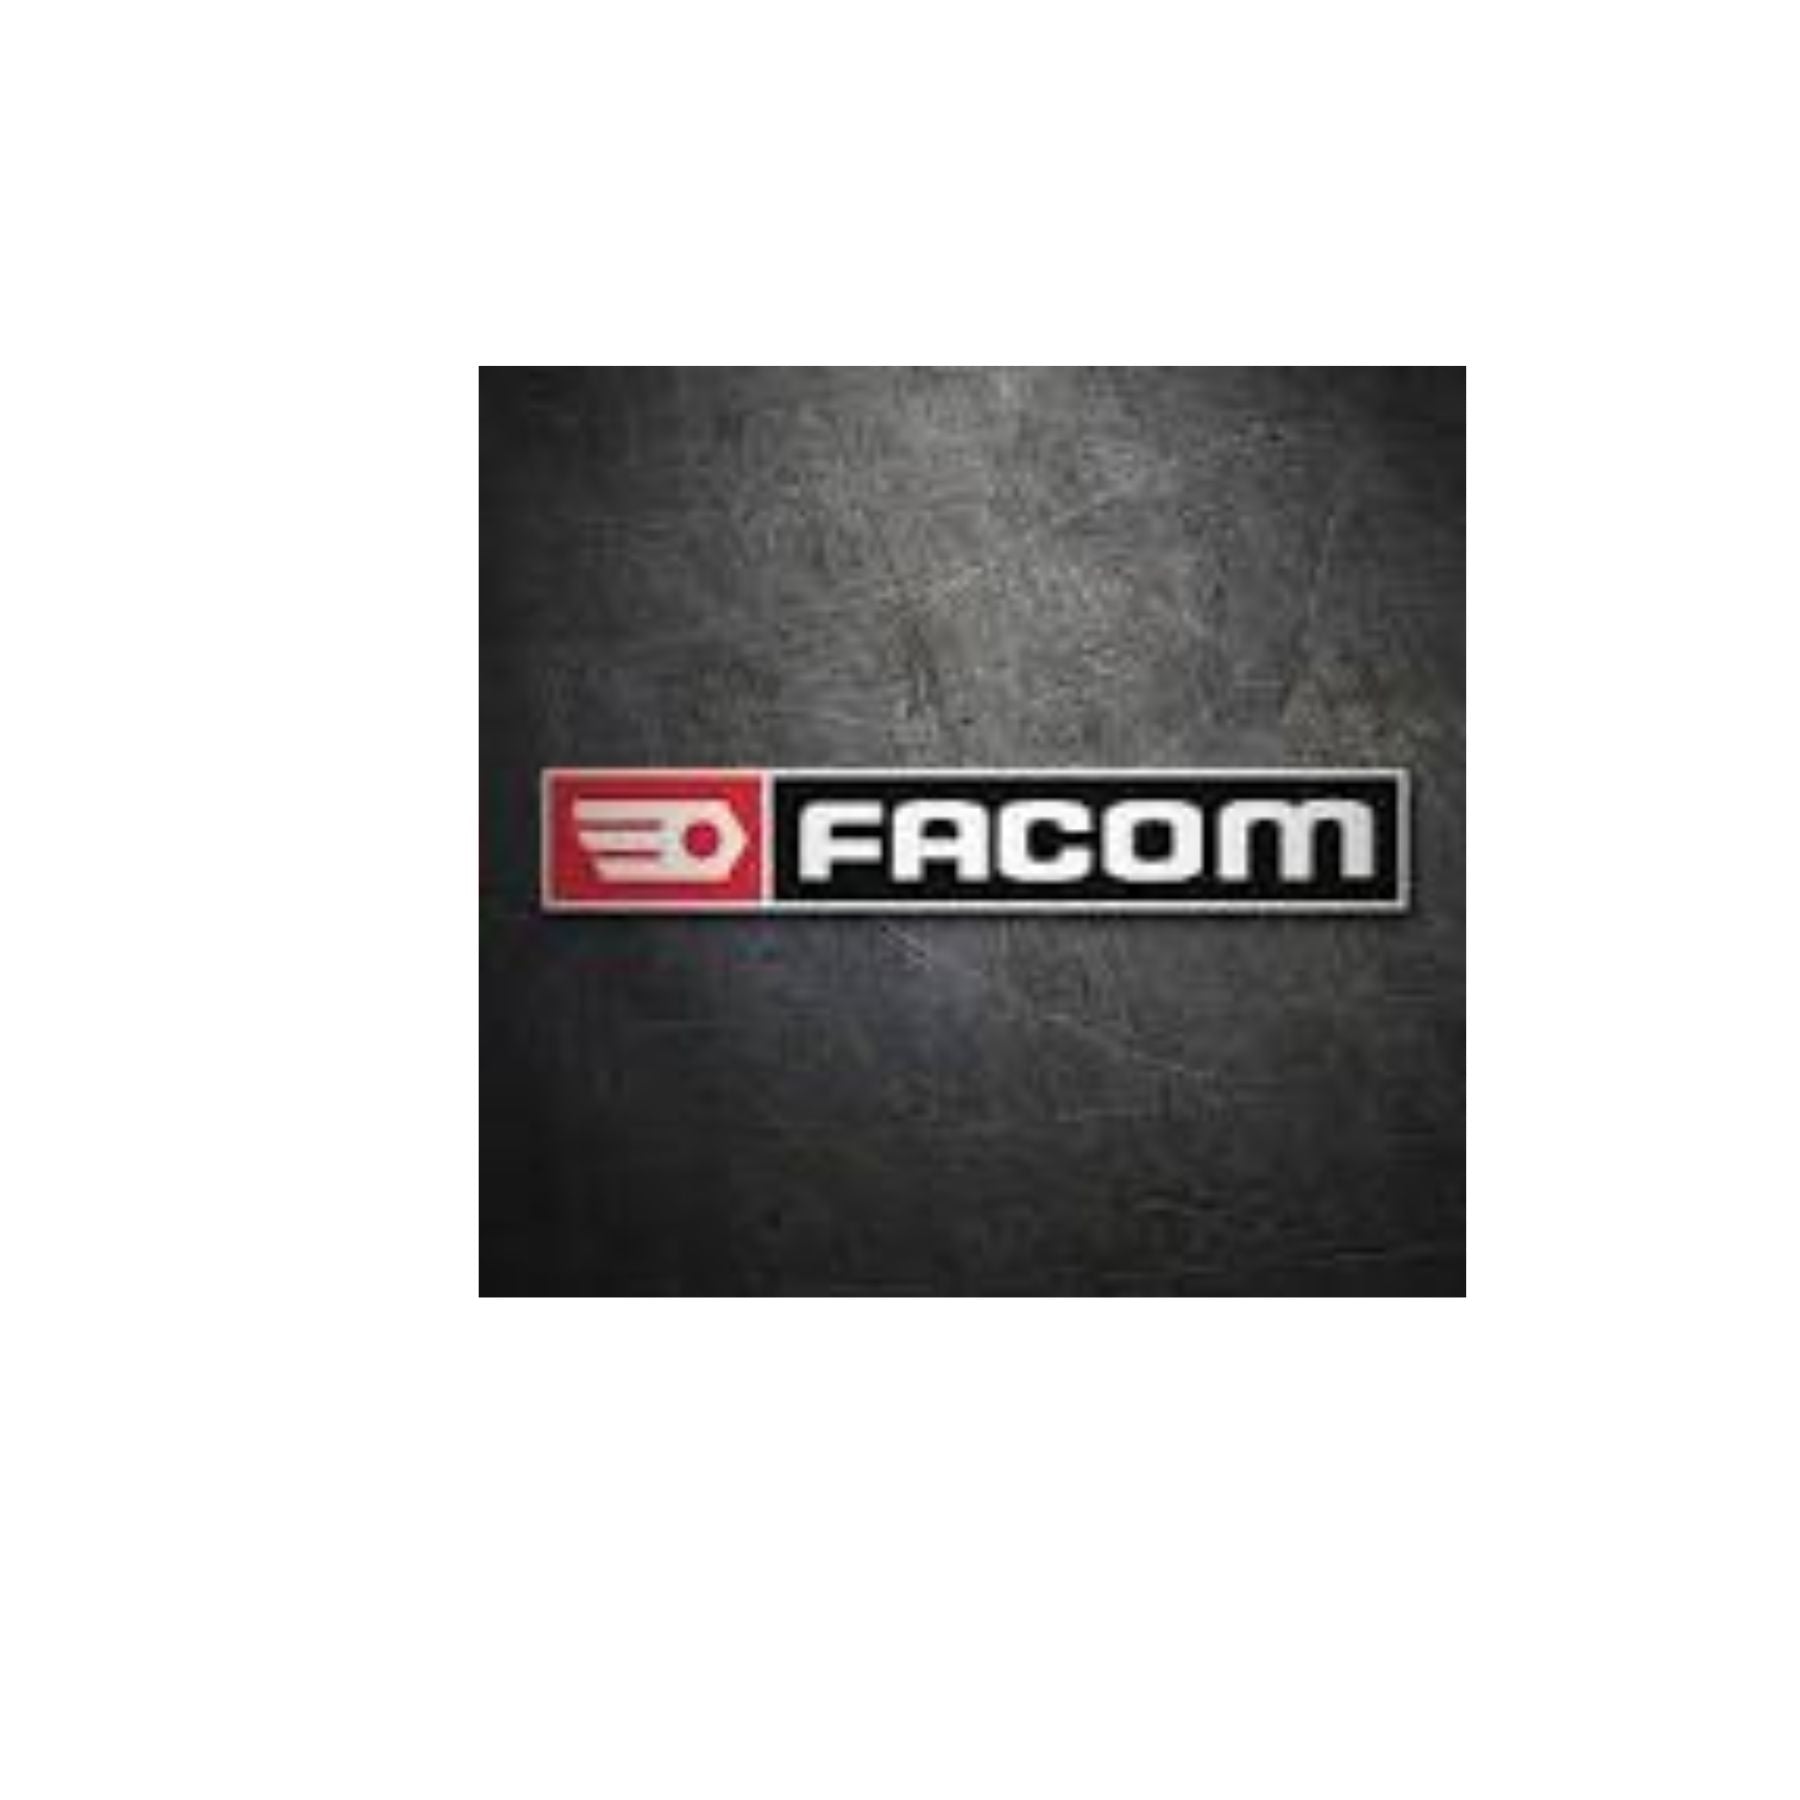 Facom E.306A135J Digital Electronic Torque Wrenches with Ratchet, Capacity 6.17-135, Square 3/8